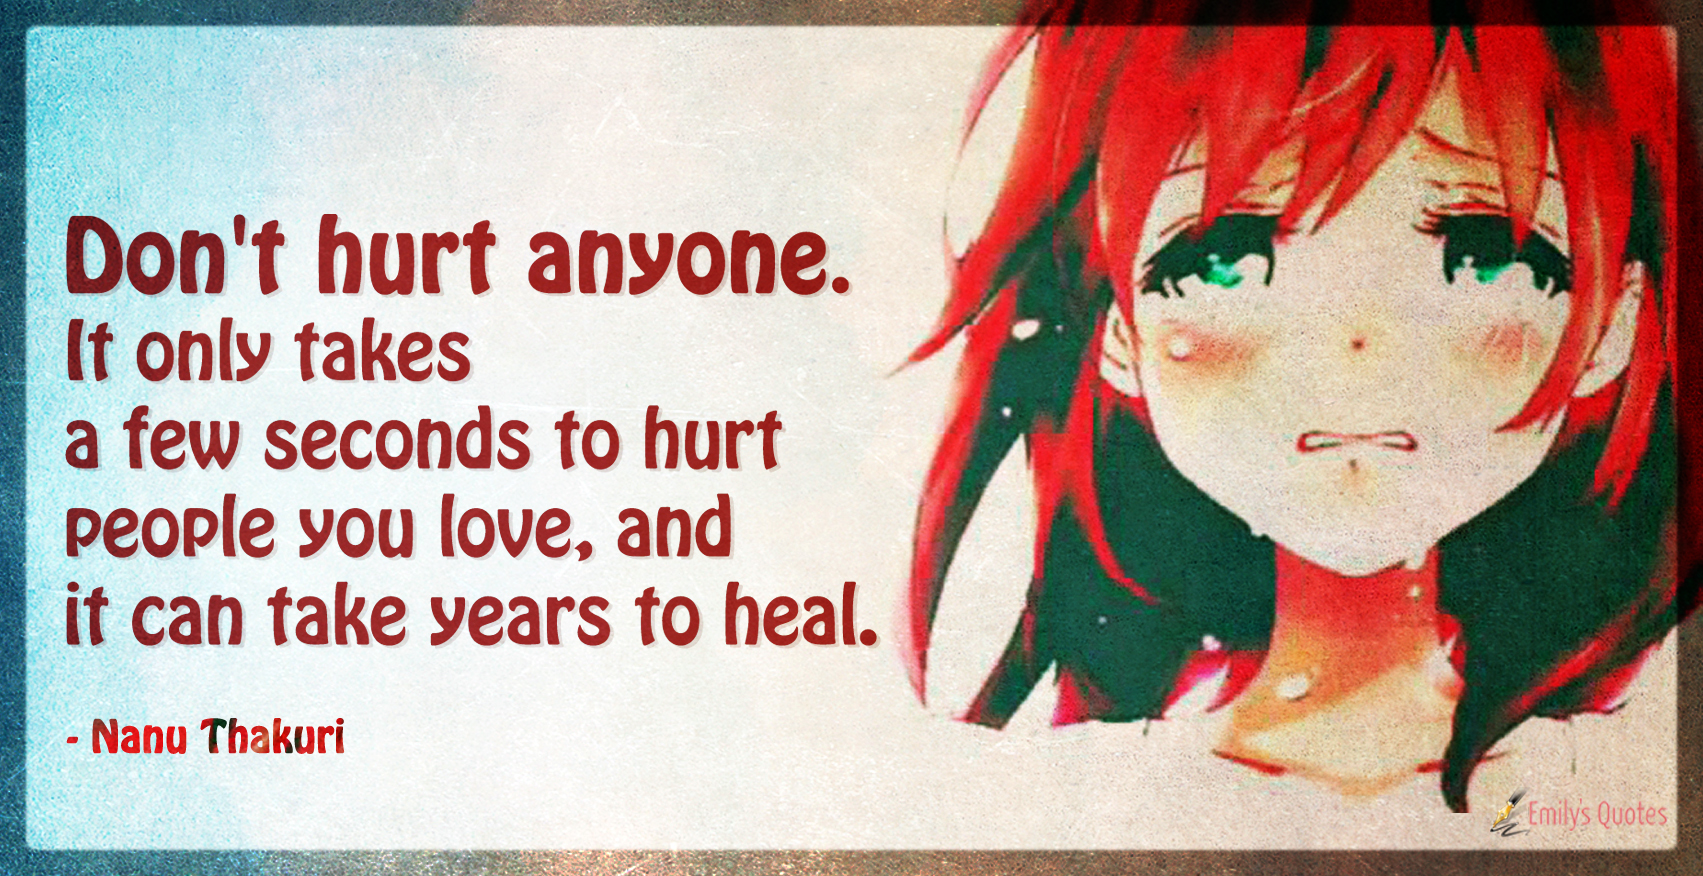 Don’t hurt anyone. It only takes a few seconds to hurt people you love, and it